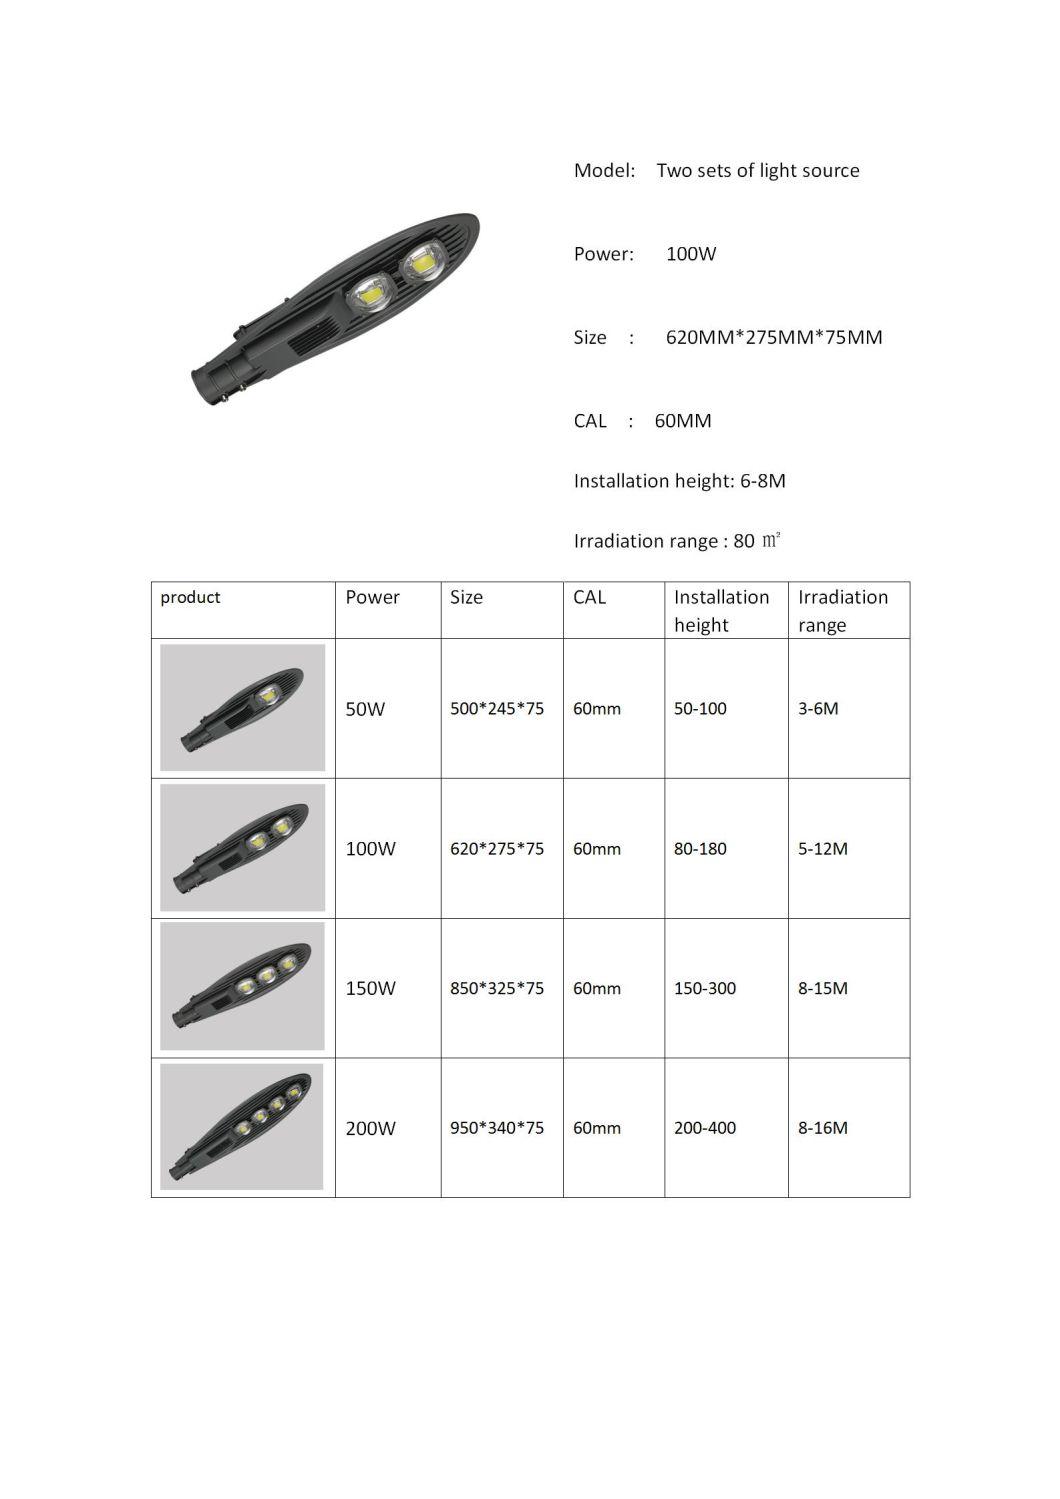 All-in-One Integrated Outdoor LED Street Light Drawing Easy